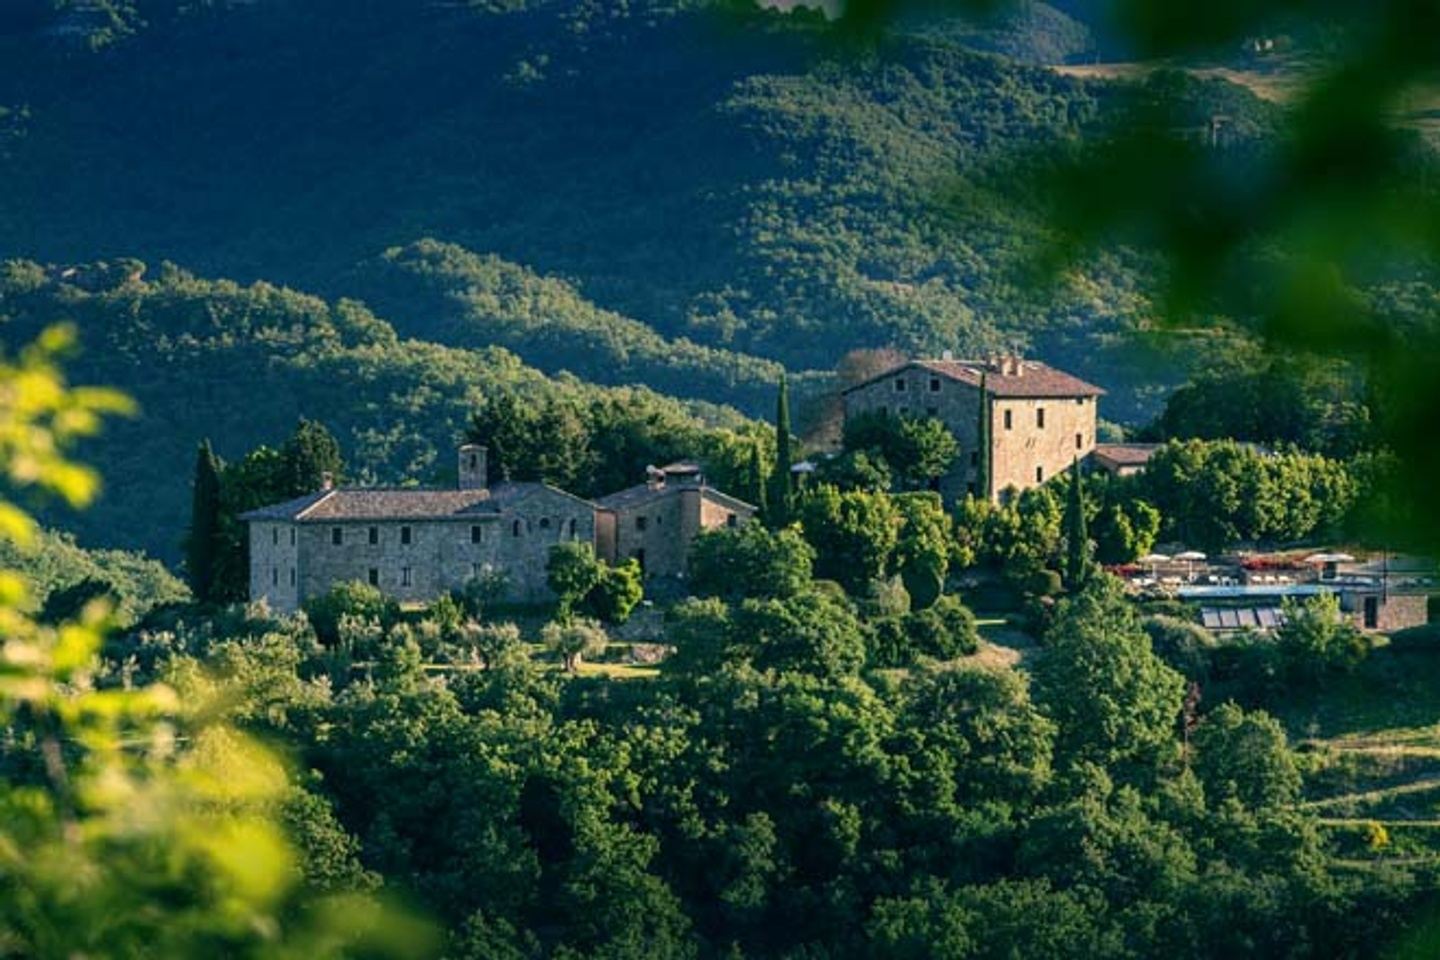 Retreat To Umbria: Yoga, Meditation, Exploration in the Hills of Italy